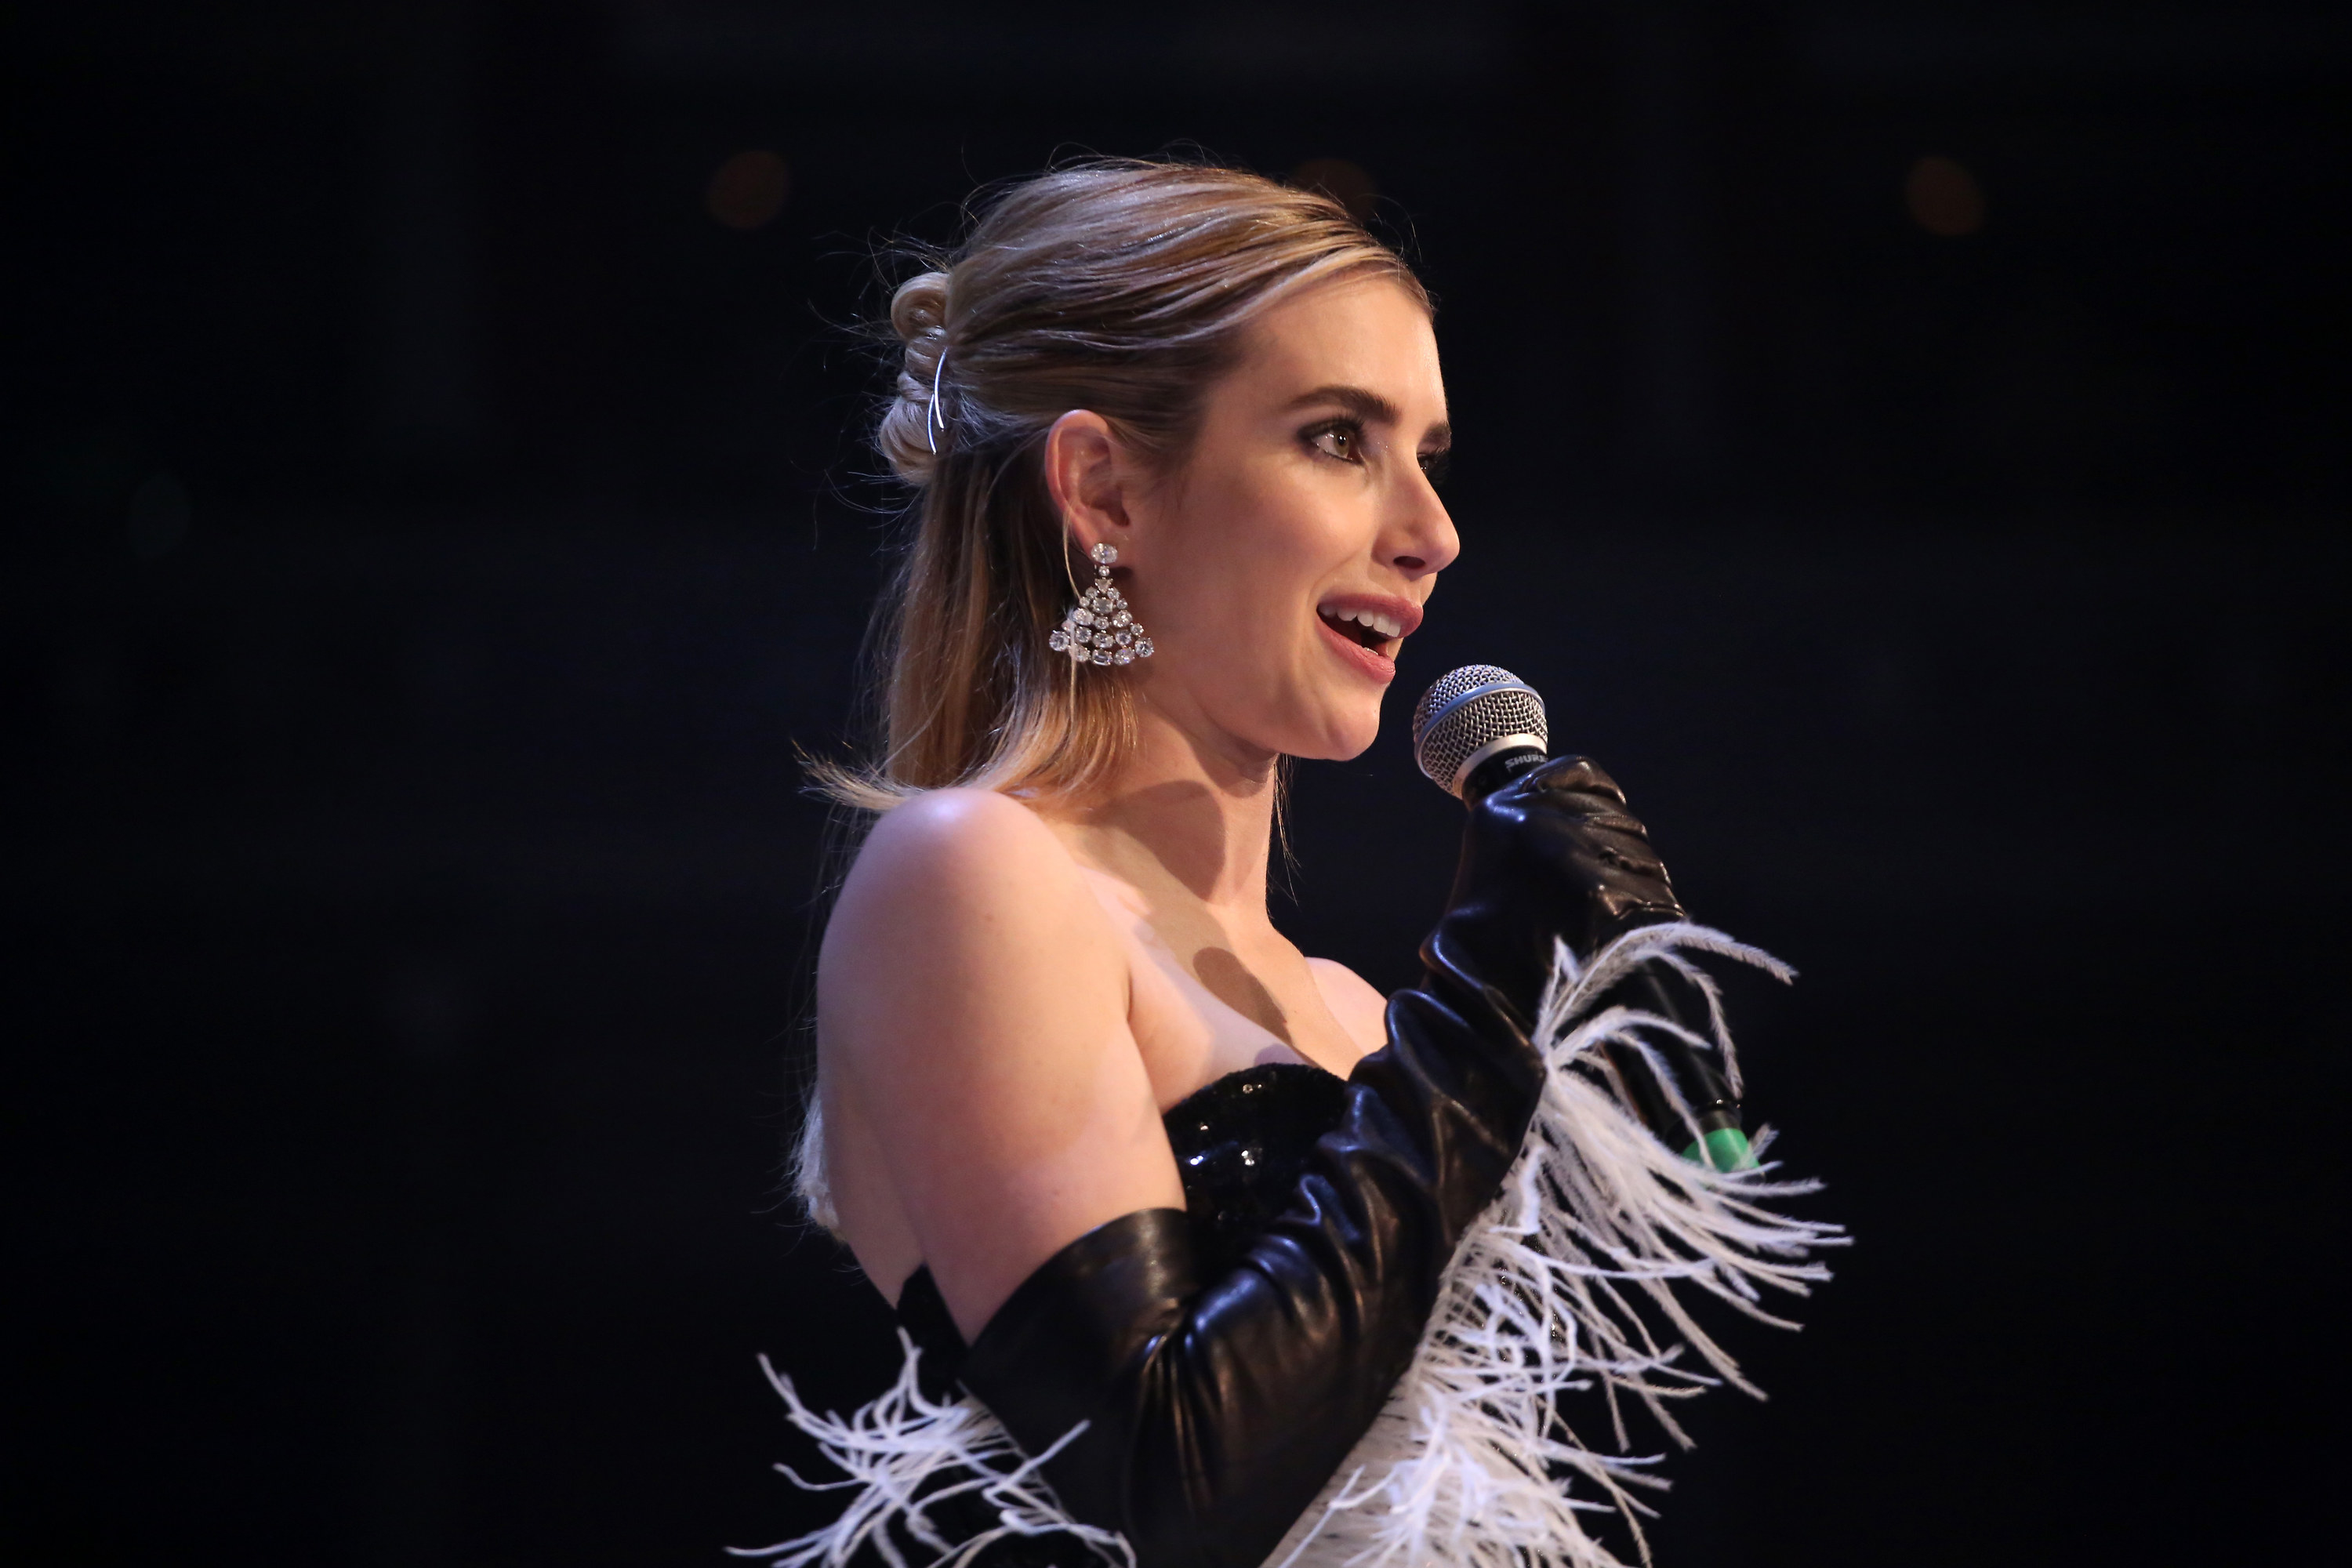 Emma Roberts speaks into a microphone onstage